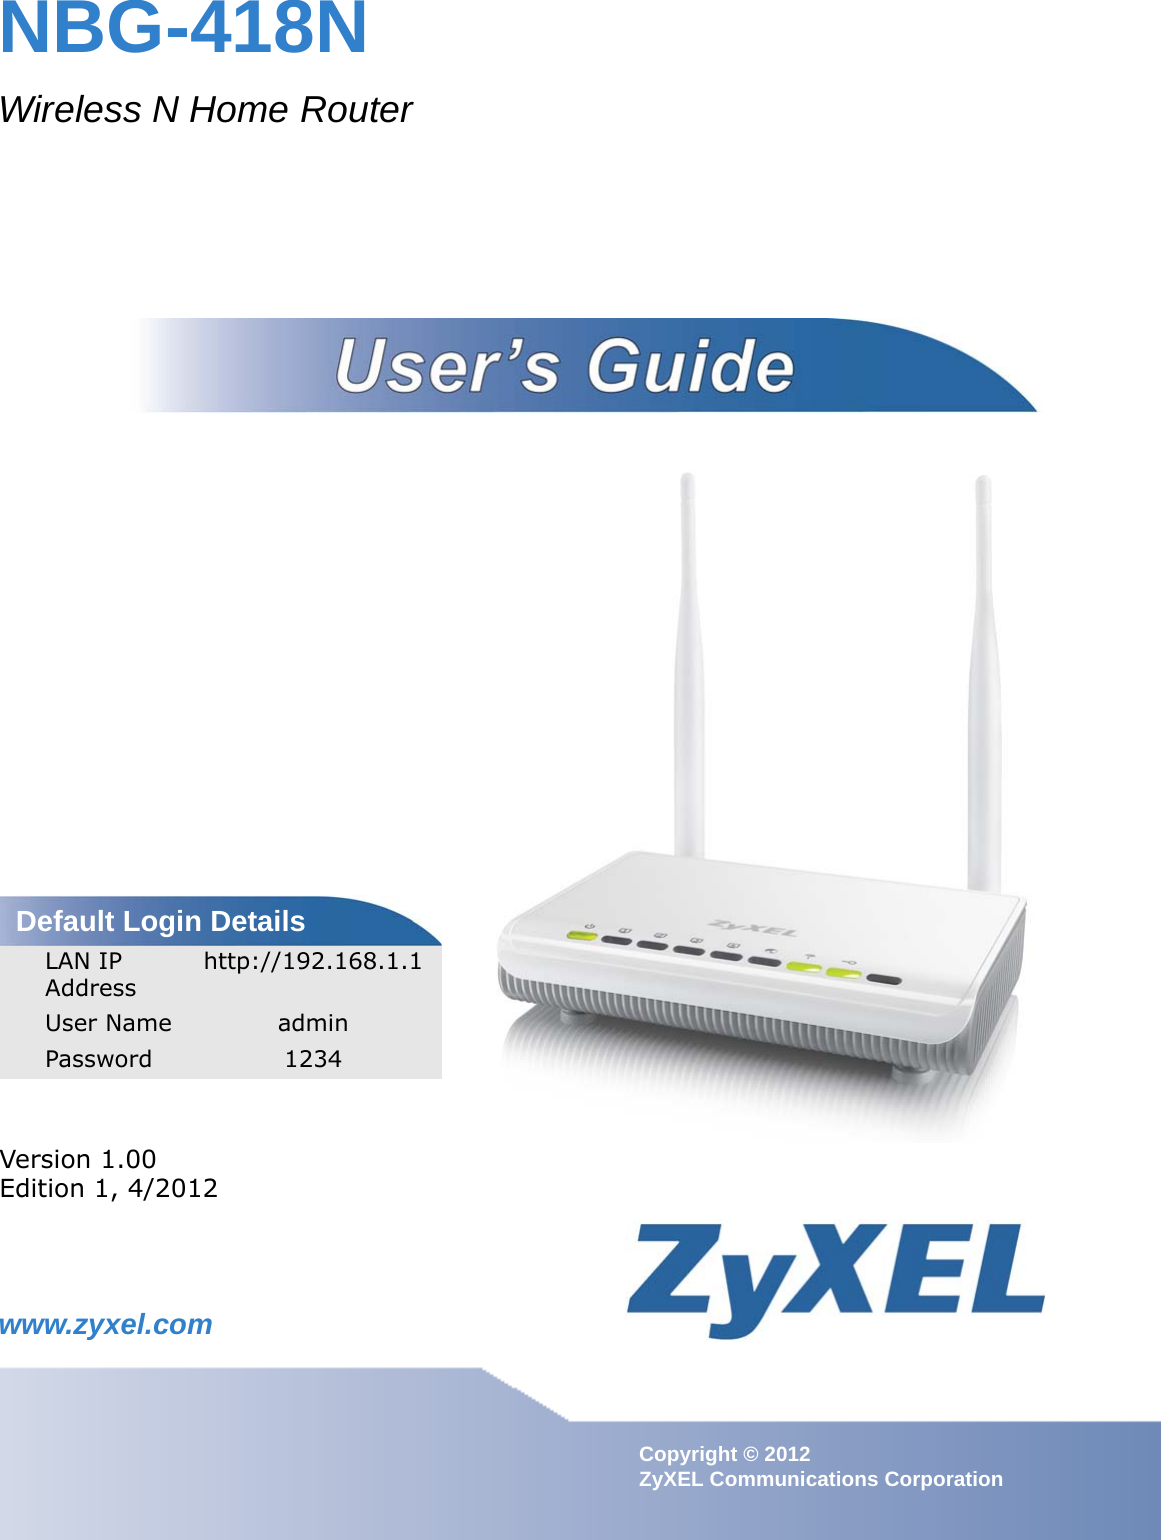 www.zyxel.comwww.zyxel.comNBG-418NWireless N Home RouterIMPORTANT!READ CAREFULLY BEFORE USE.KEEP THIS GUIDE FOR FUTURE REFERENCE.IMPORTANT!Copyright © 2012 ZyXEL Communications CorporationVersion 1.00Edition 1, 4/2012Default Login DetailsLAN IP Address http://192.168.1.1User Name adminPassword 1234